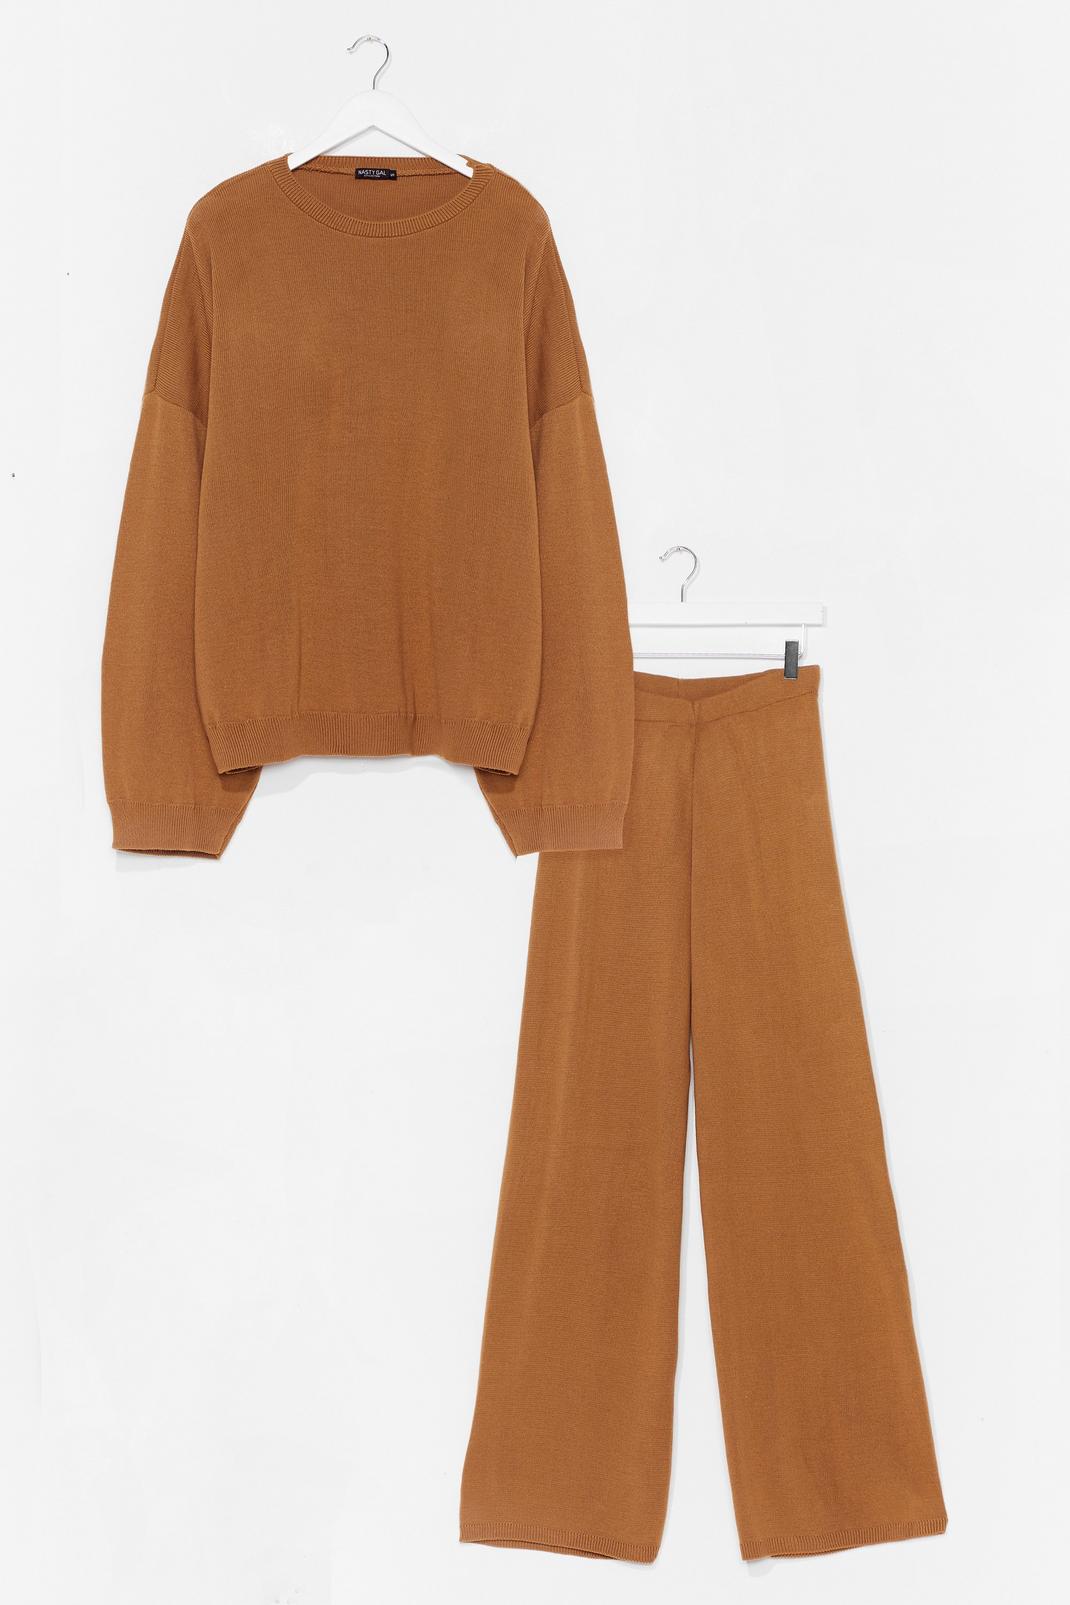 Camel You've Met Your Match Knitted Sweater and Pants image number 1